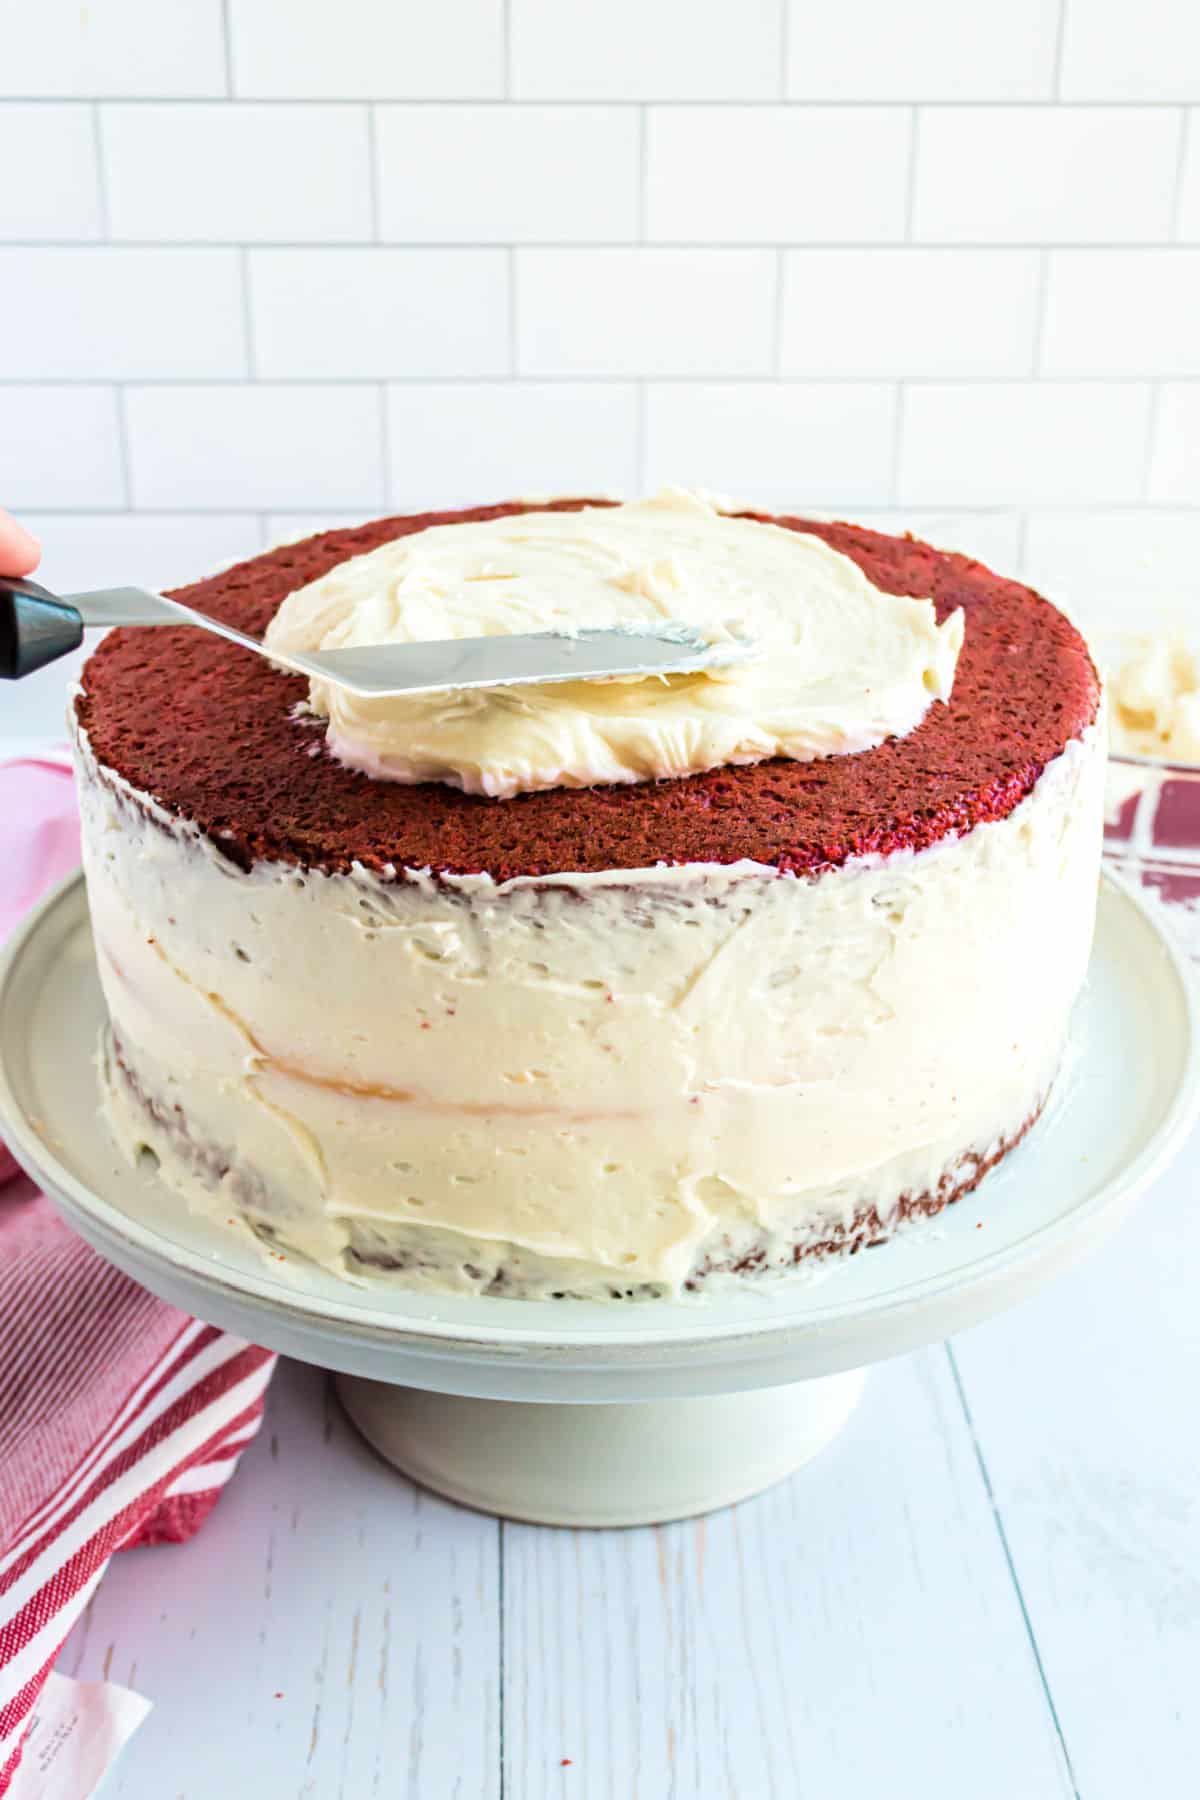 Cream cheese frosting being spread on a red velvet layer cake.